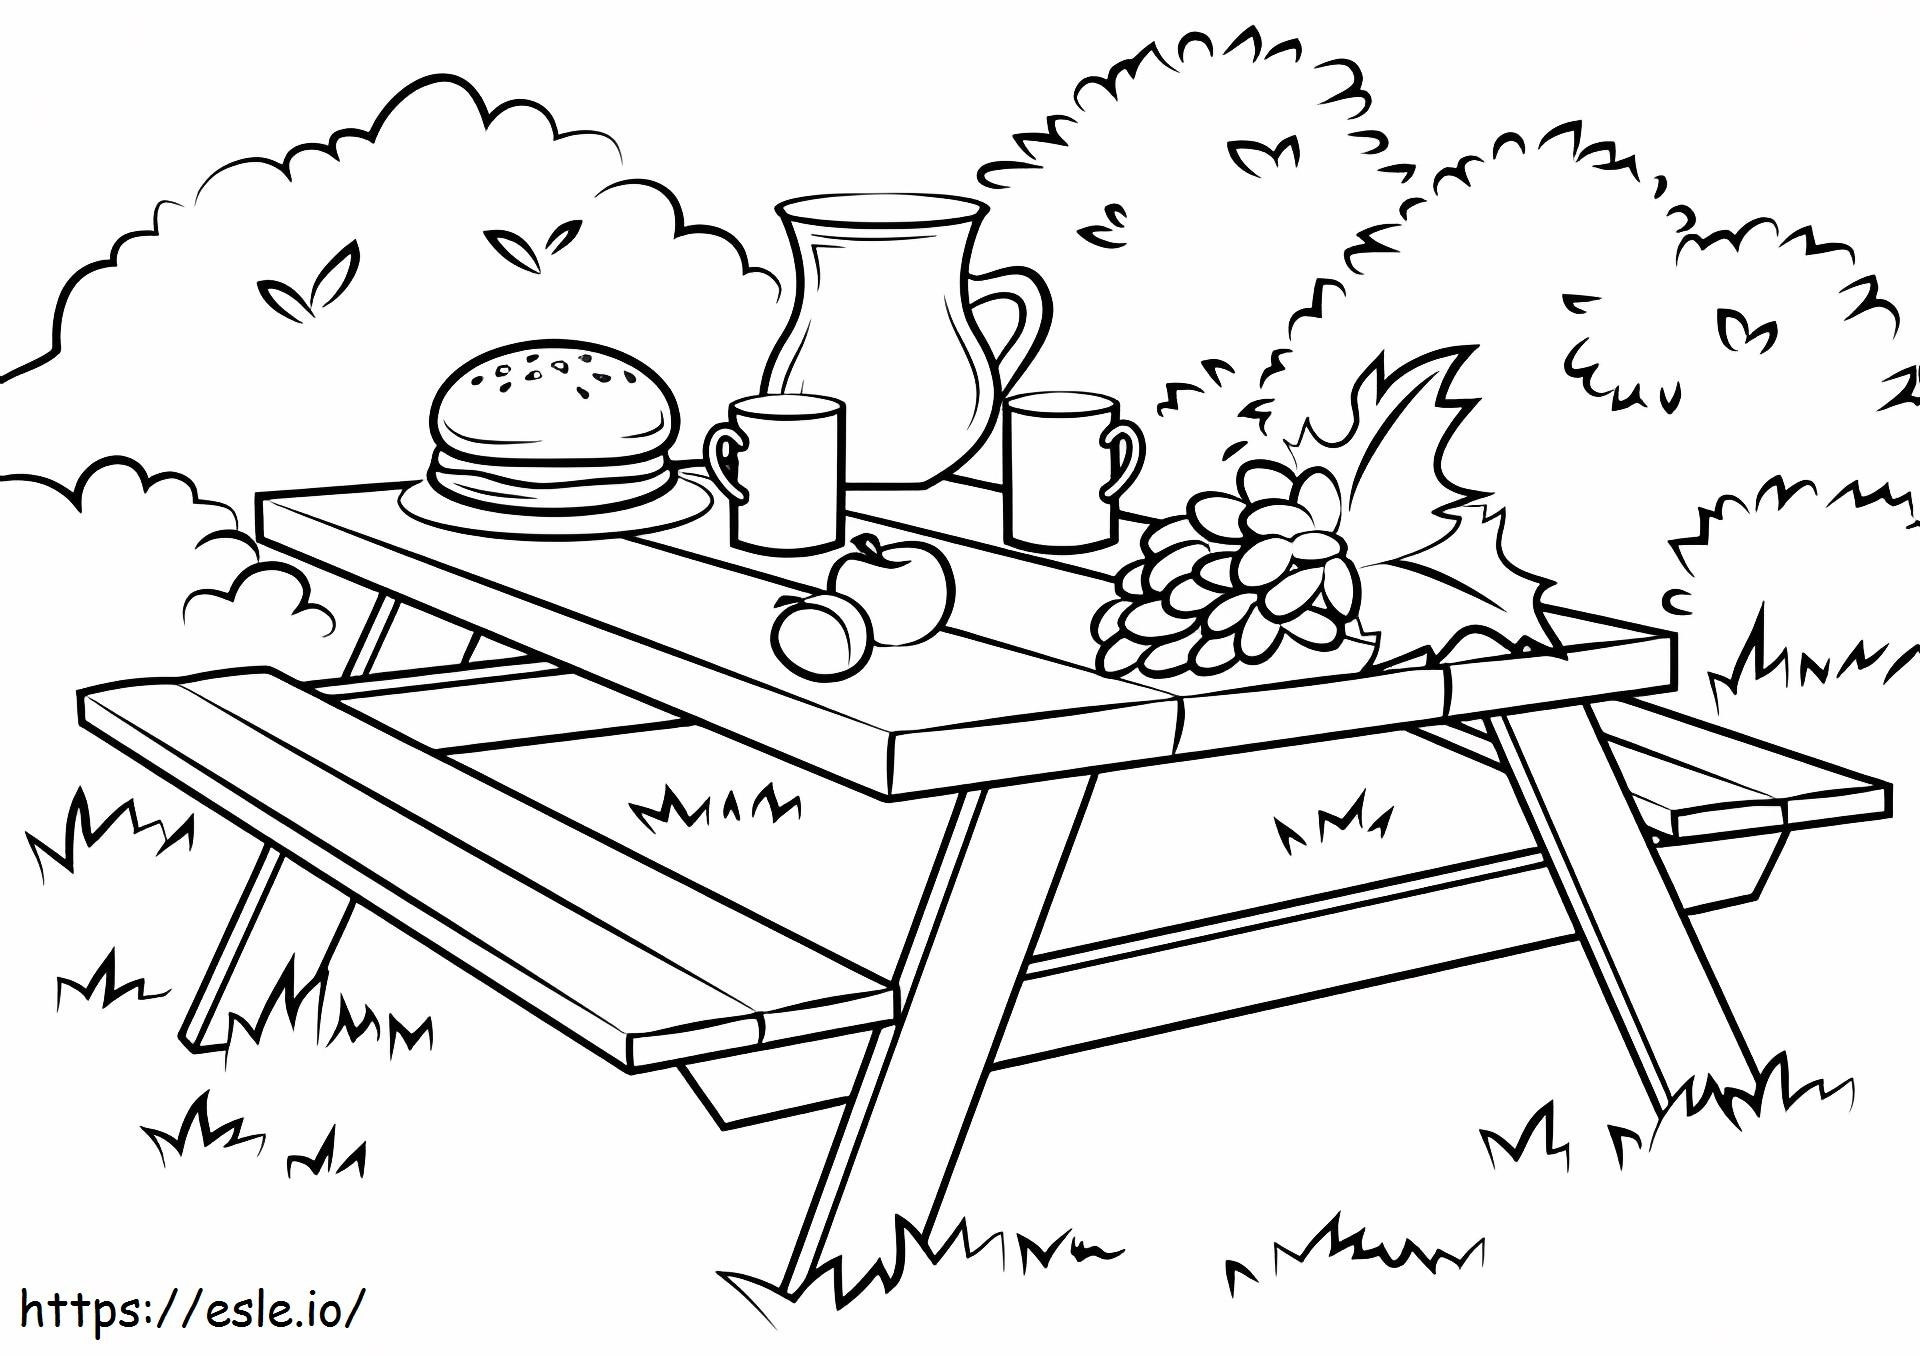 Food On The Table coloring page